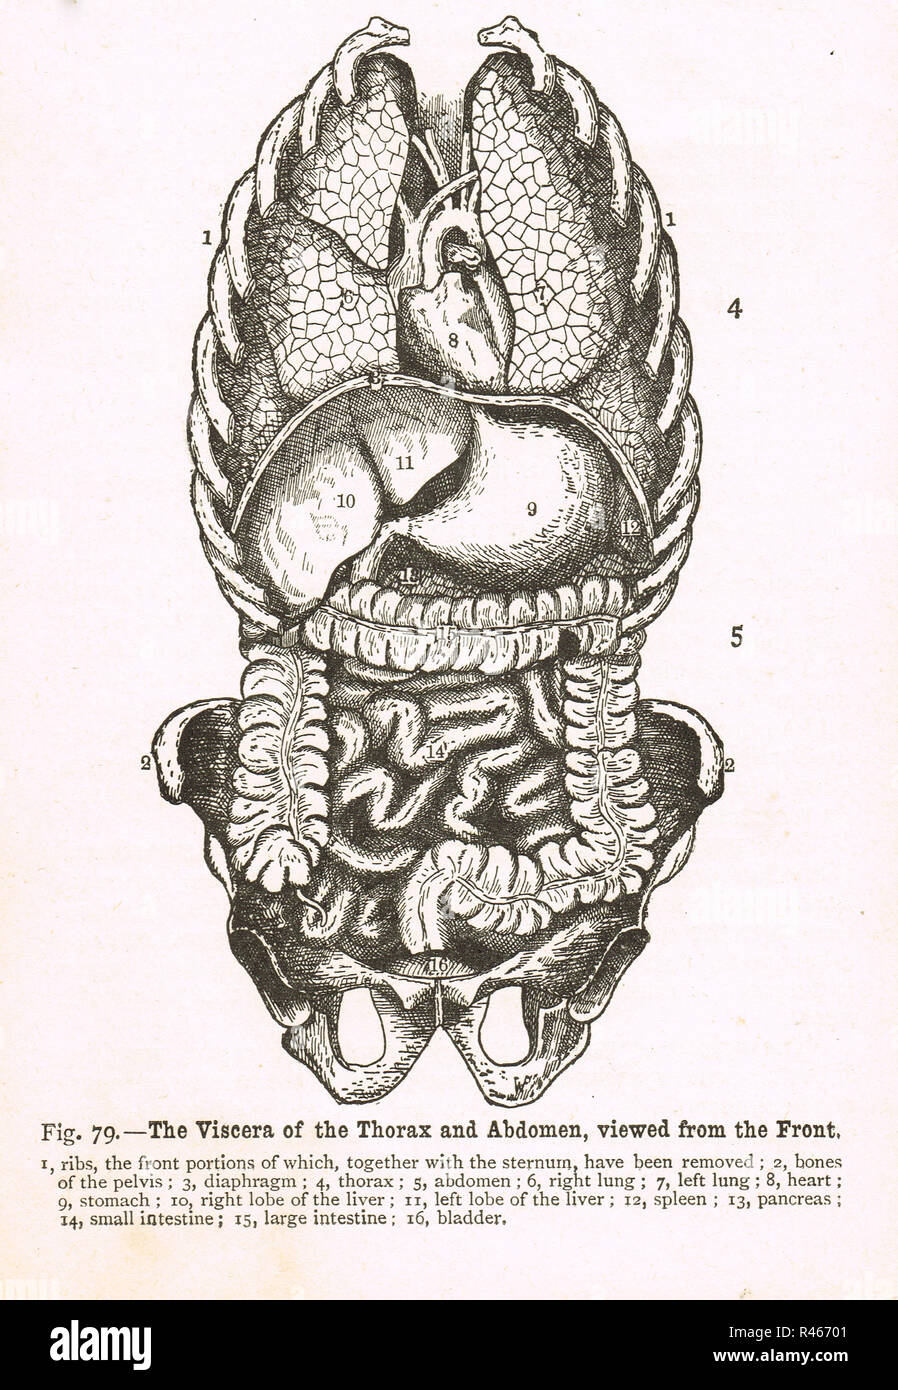 Viscera of the Thorax and Abdomen,viewed from the front.  A 19th century diagram Stock Photo